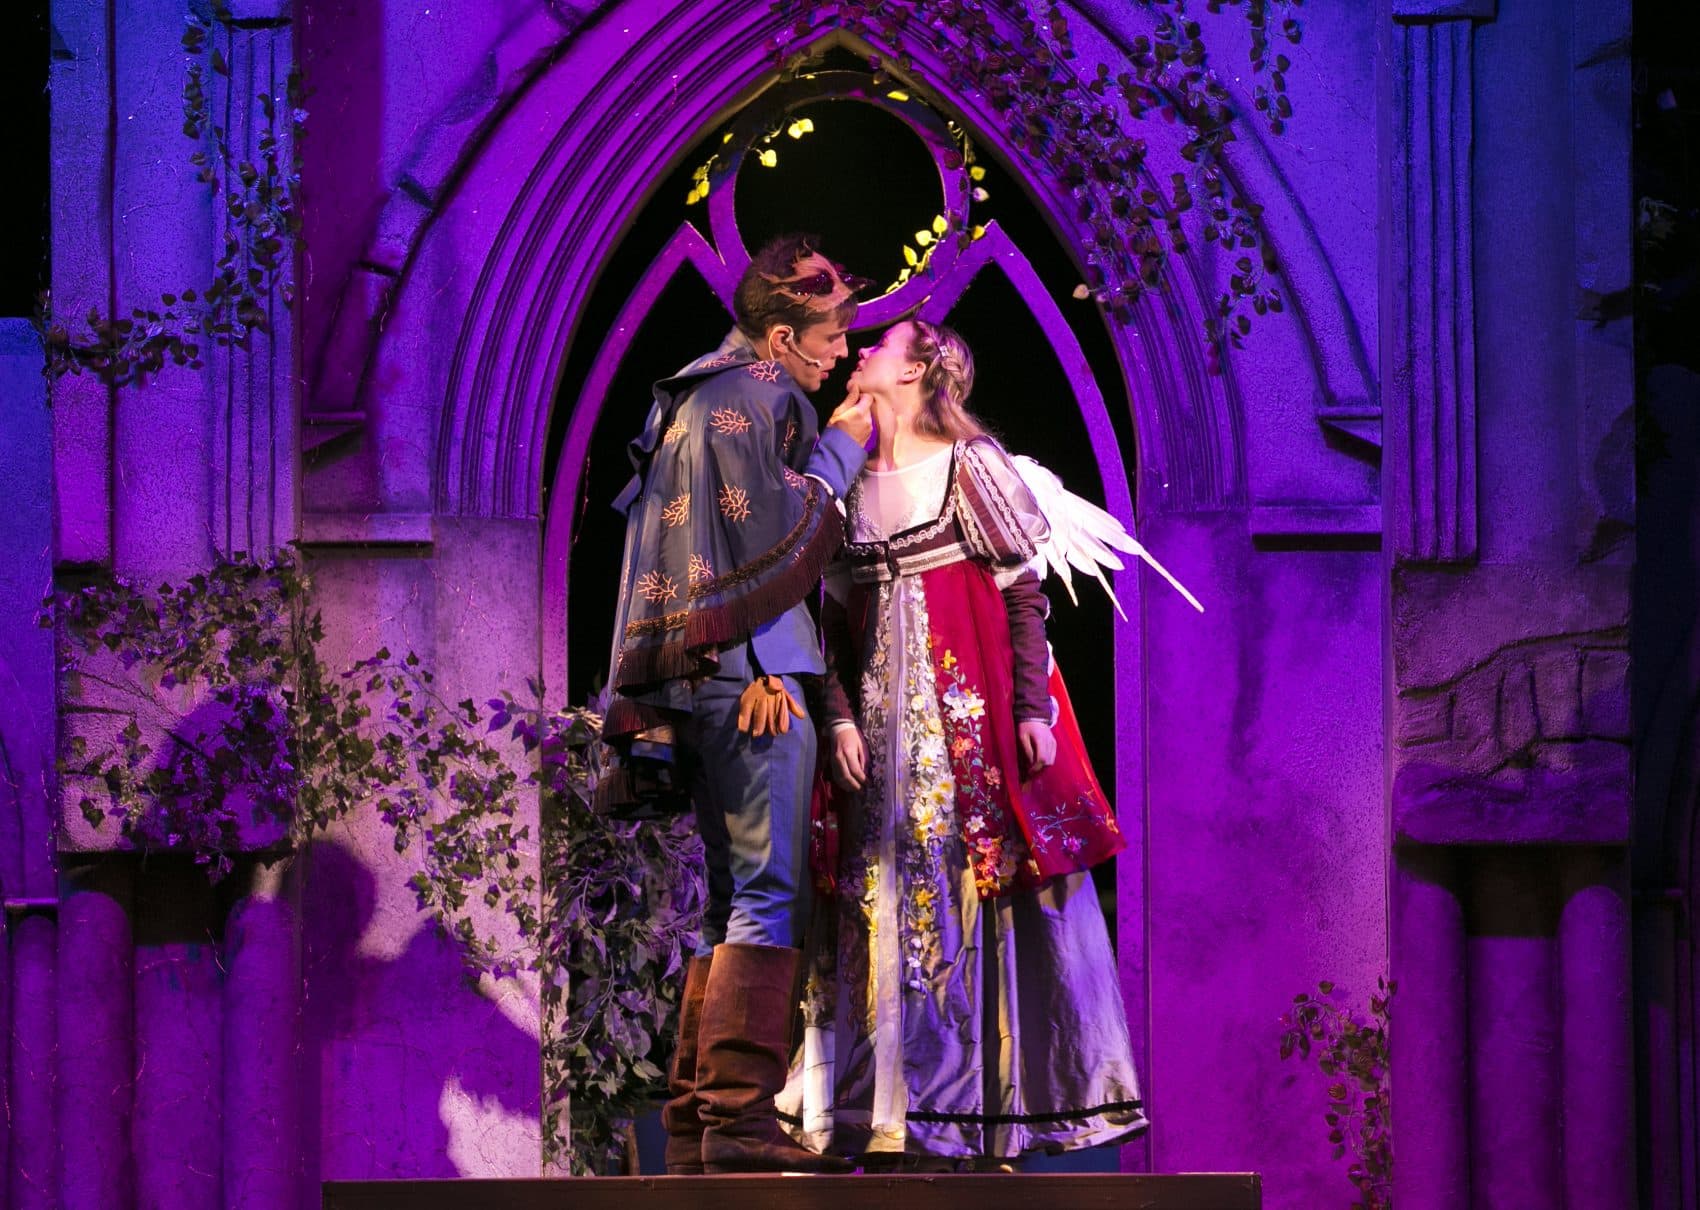 Romeo And Juliet' Are Star-Crossed And Starlit At Shakespeare On The Common  | WBUR News